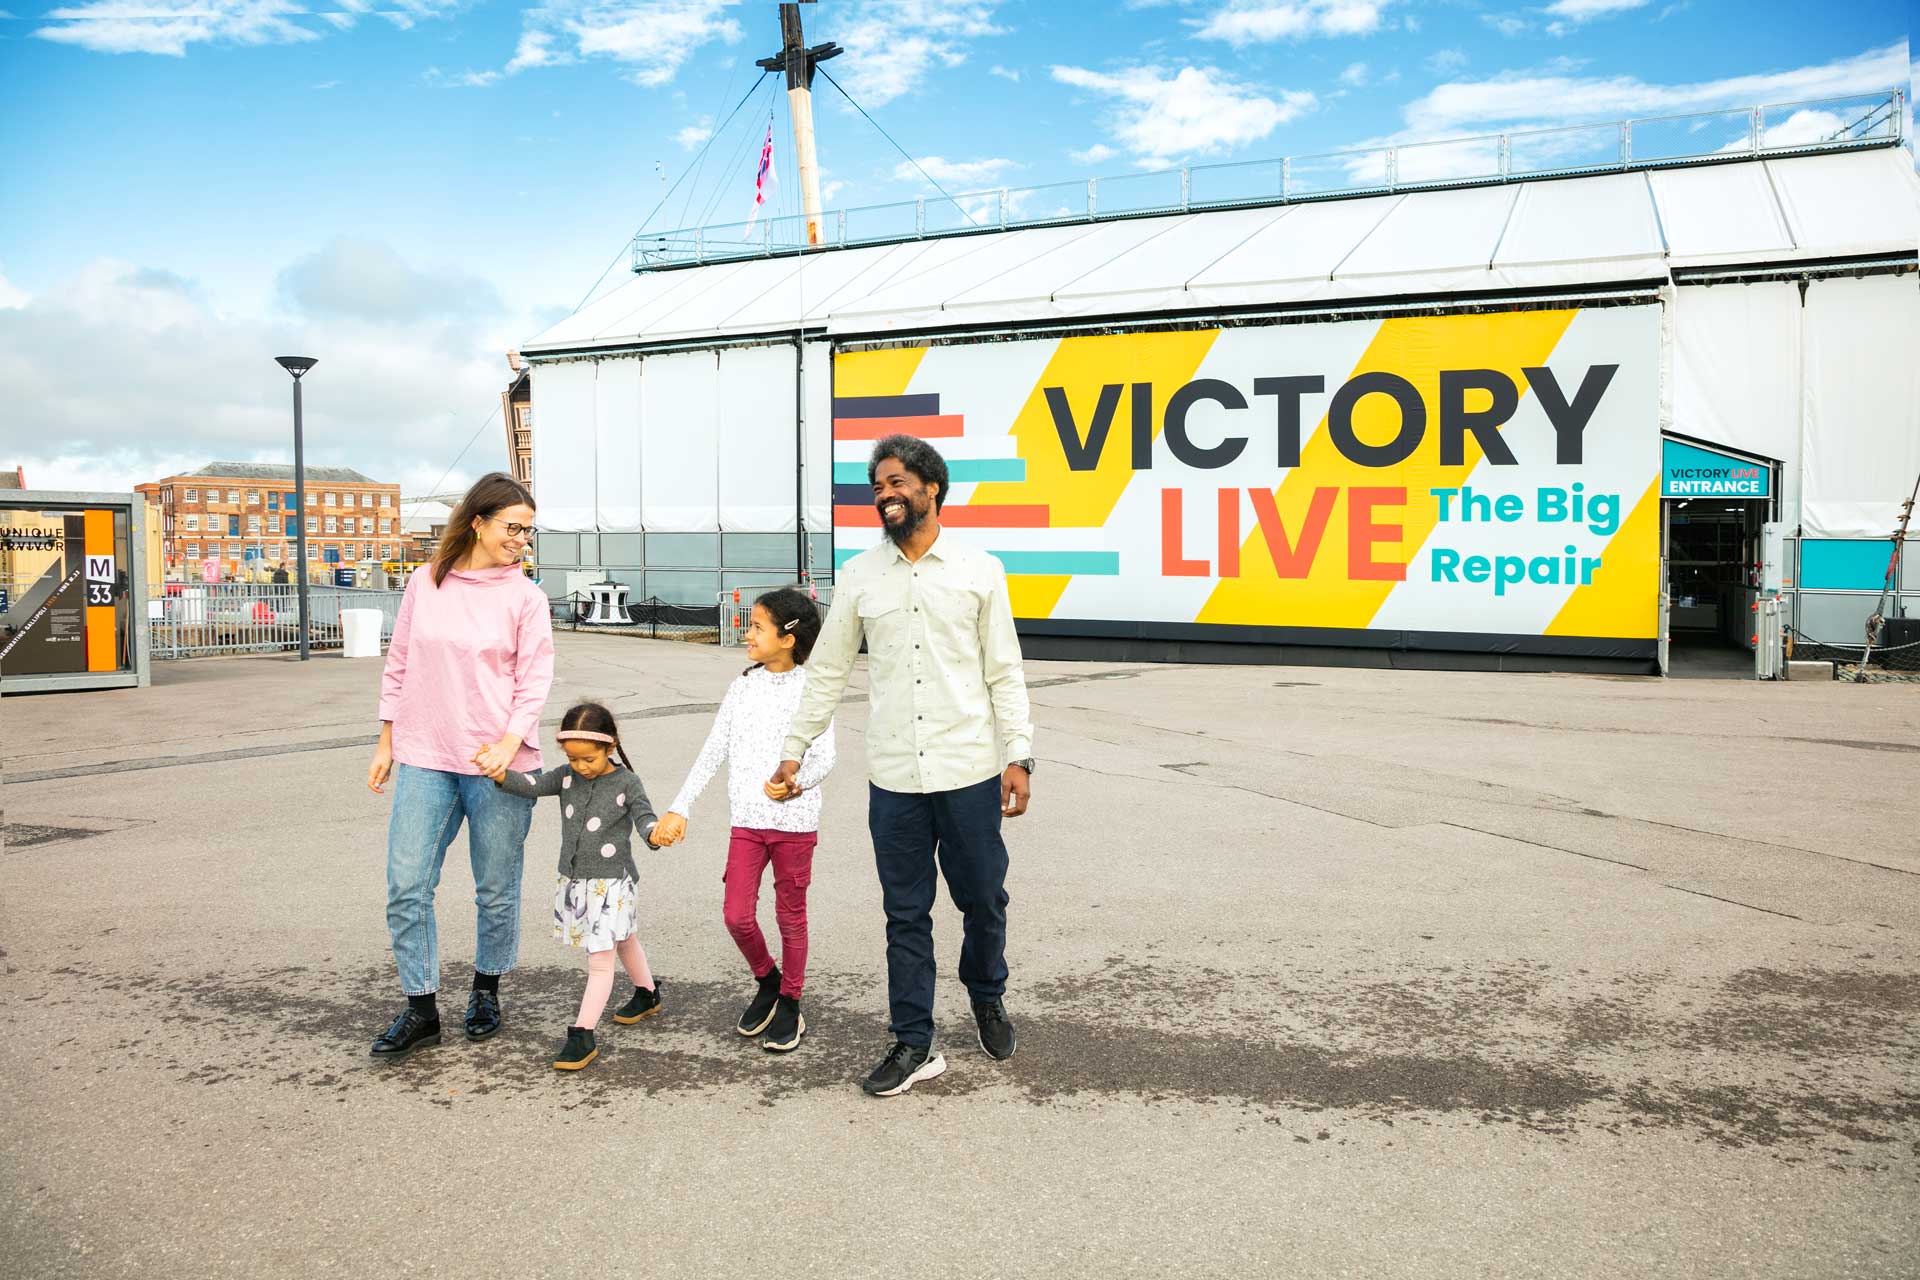 Family leaving Victory Live exhibition at Portsmouth Historic Dockyard in the sunshine